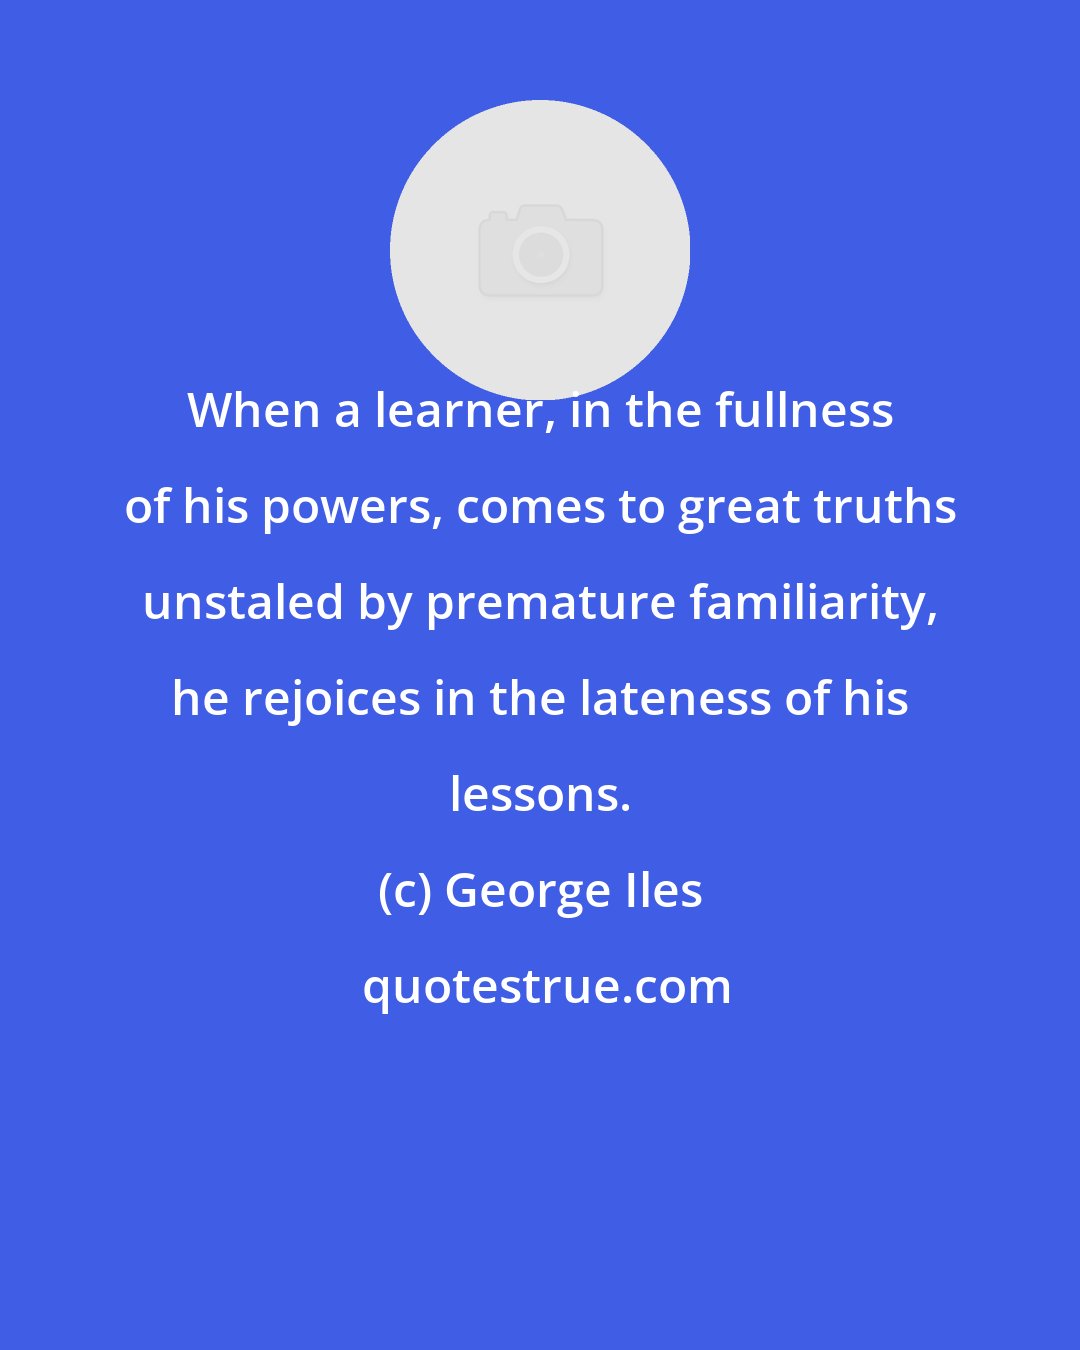 George Iles: When a learner, in the fullness of his powers, comes to great truths unstaled by premature familiarity, he rejoices in the lateness of his lessons.